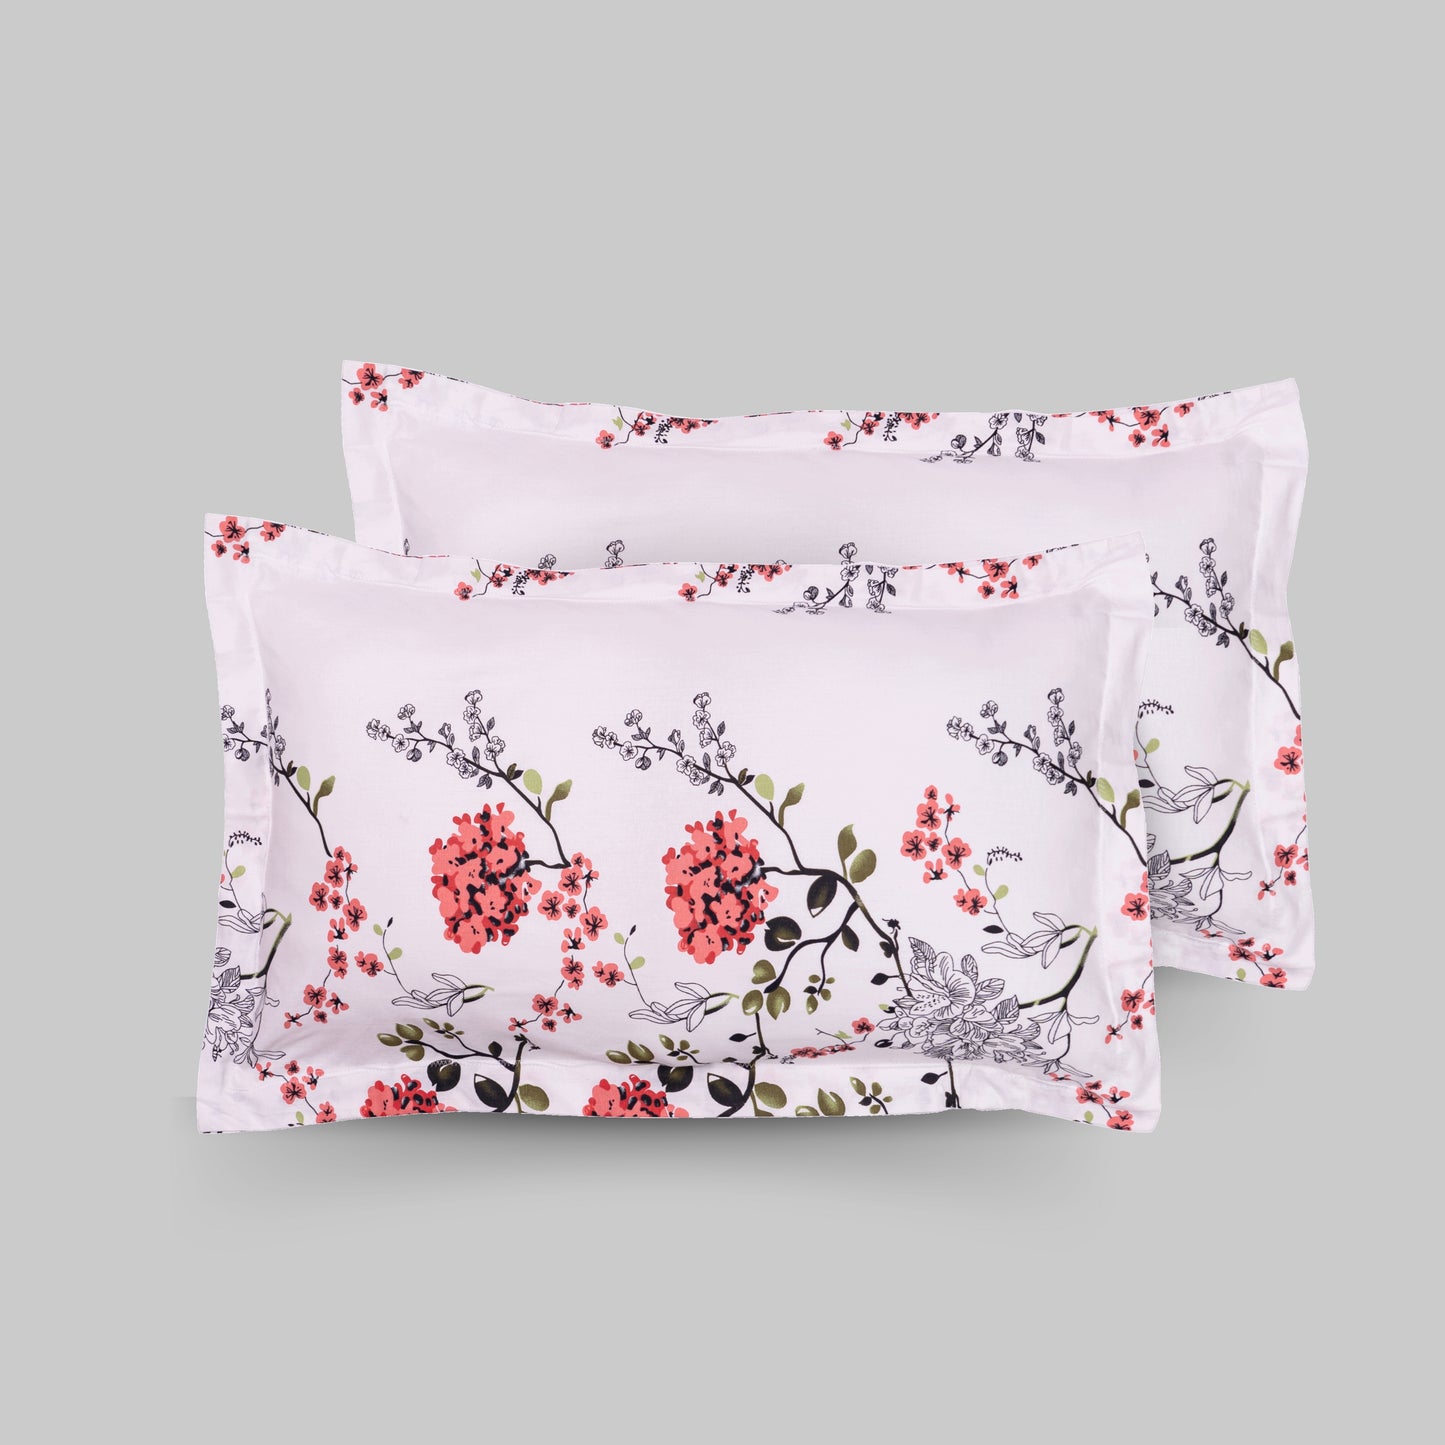 Victorian Summer Dream, Pack of 2 Pillow Covers